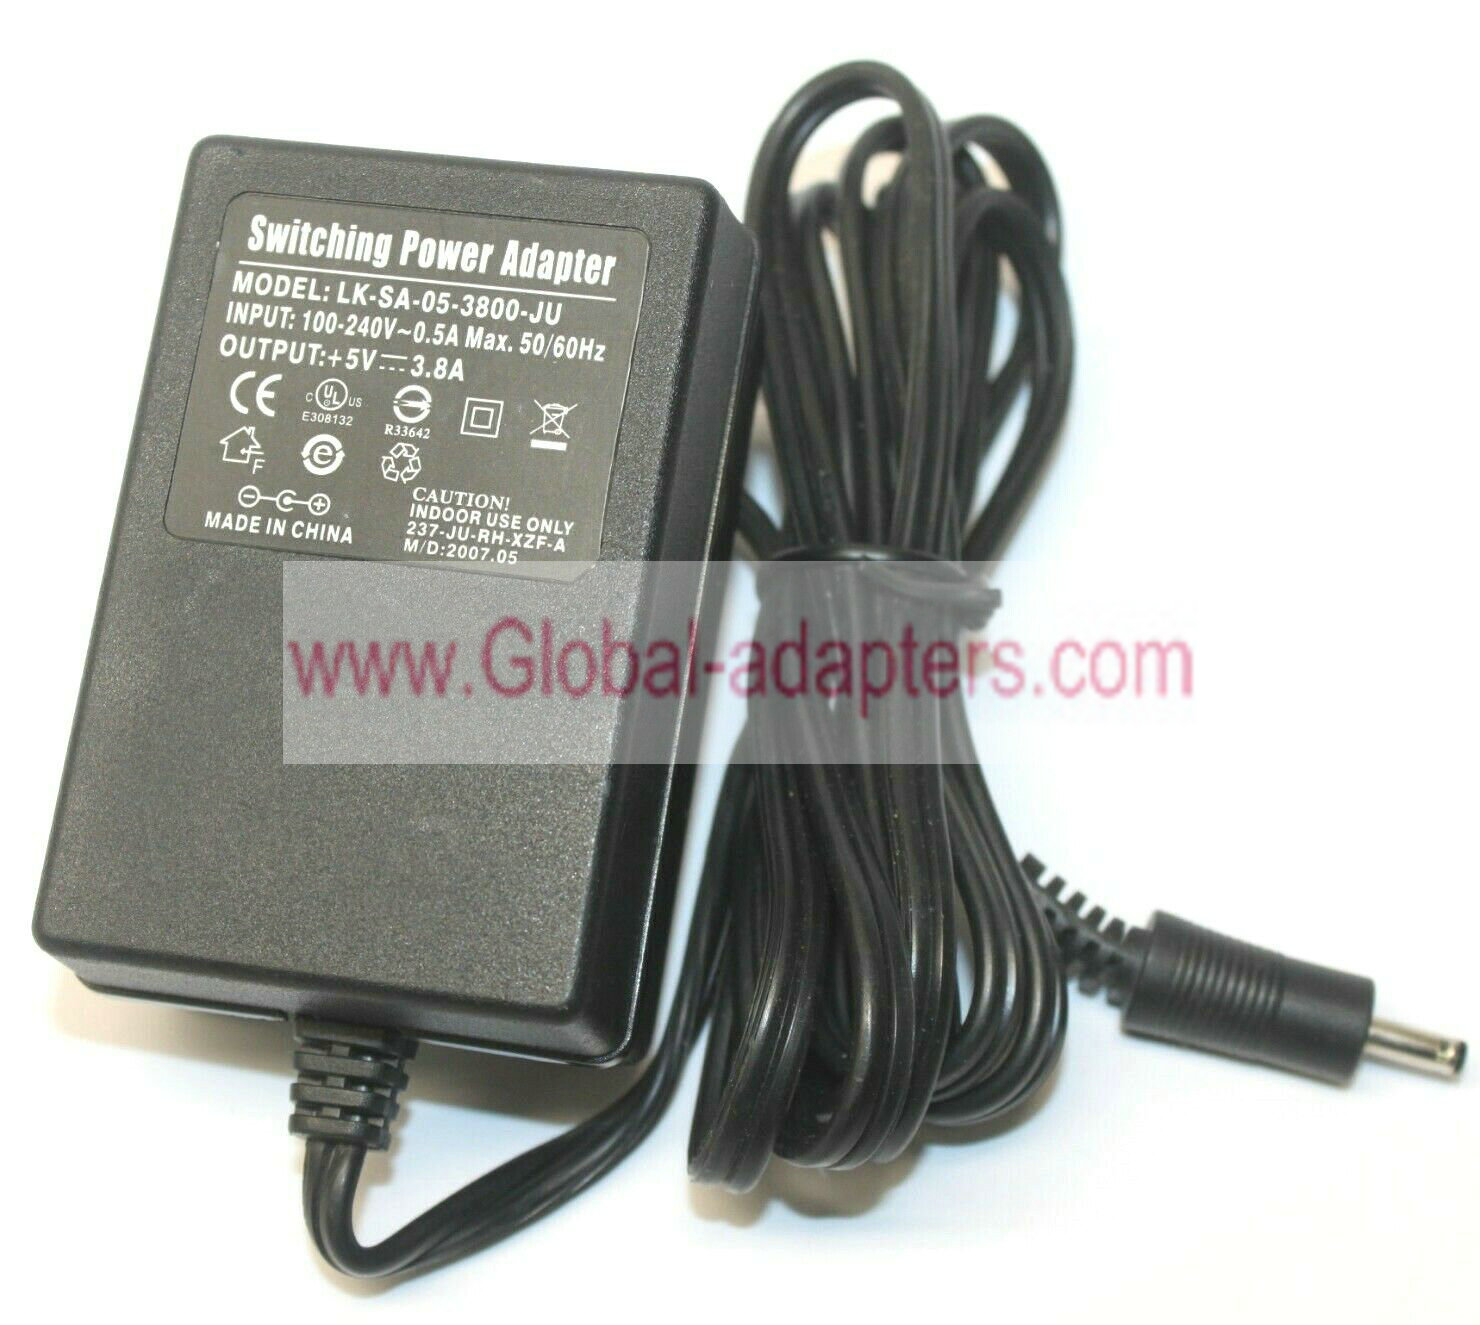 Genuine 5V 3.8A AC Adapter LK-SA-05-3800-JU Switching Power Supply Charger - Click Image to Close